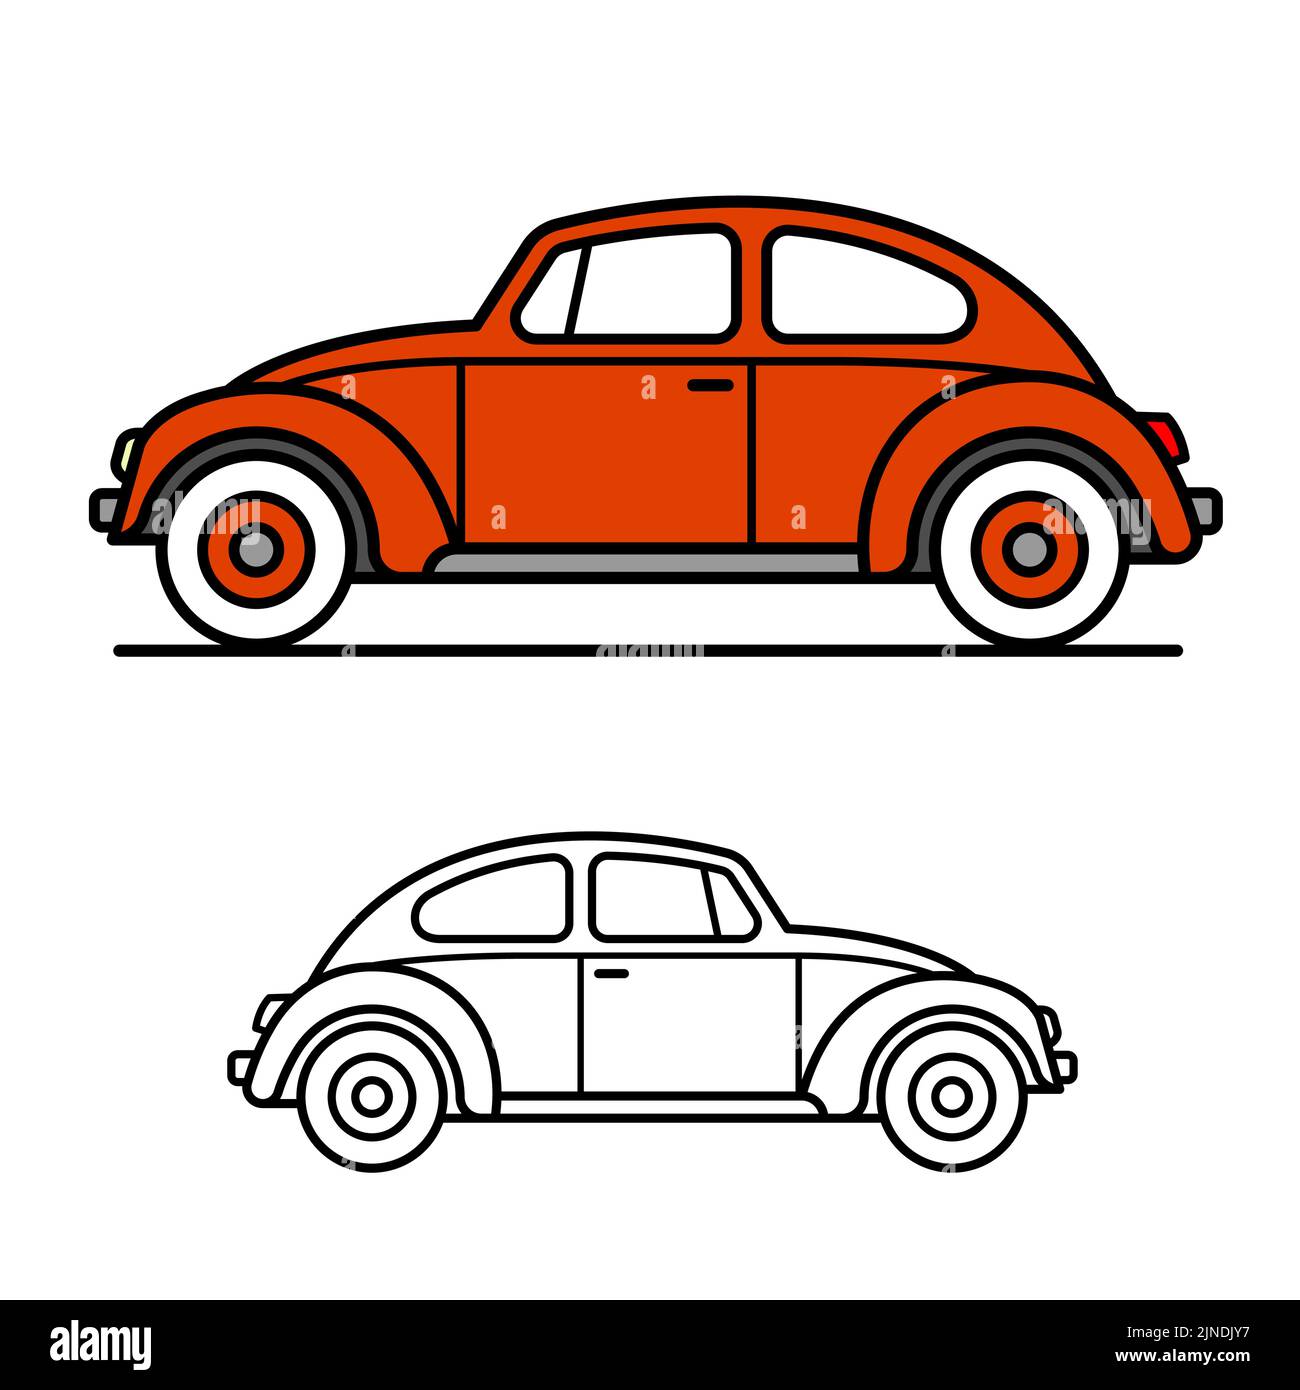 Classic vintage beetle car in red isolated on white background in two versions - vector illustration Stock Vector